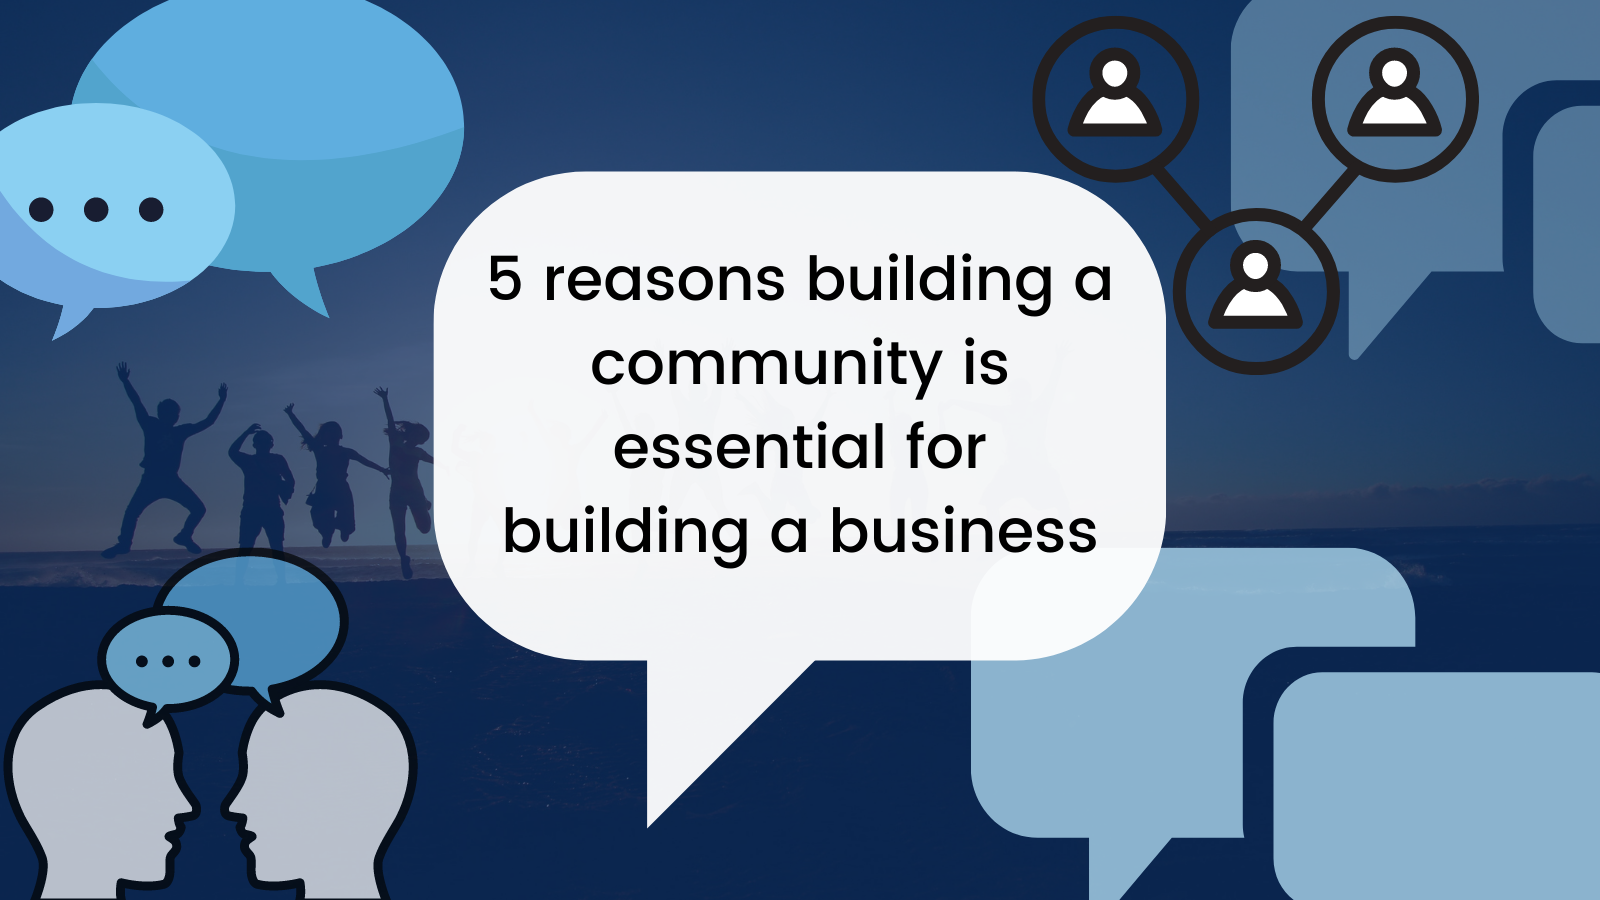 5 reasons building a community is essential for building a business